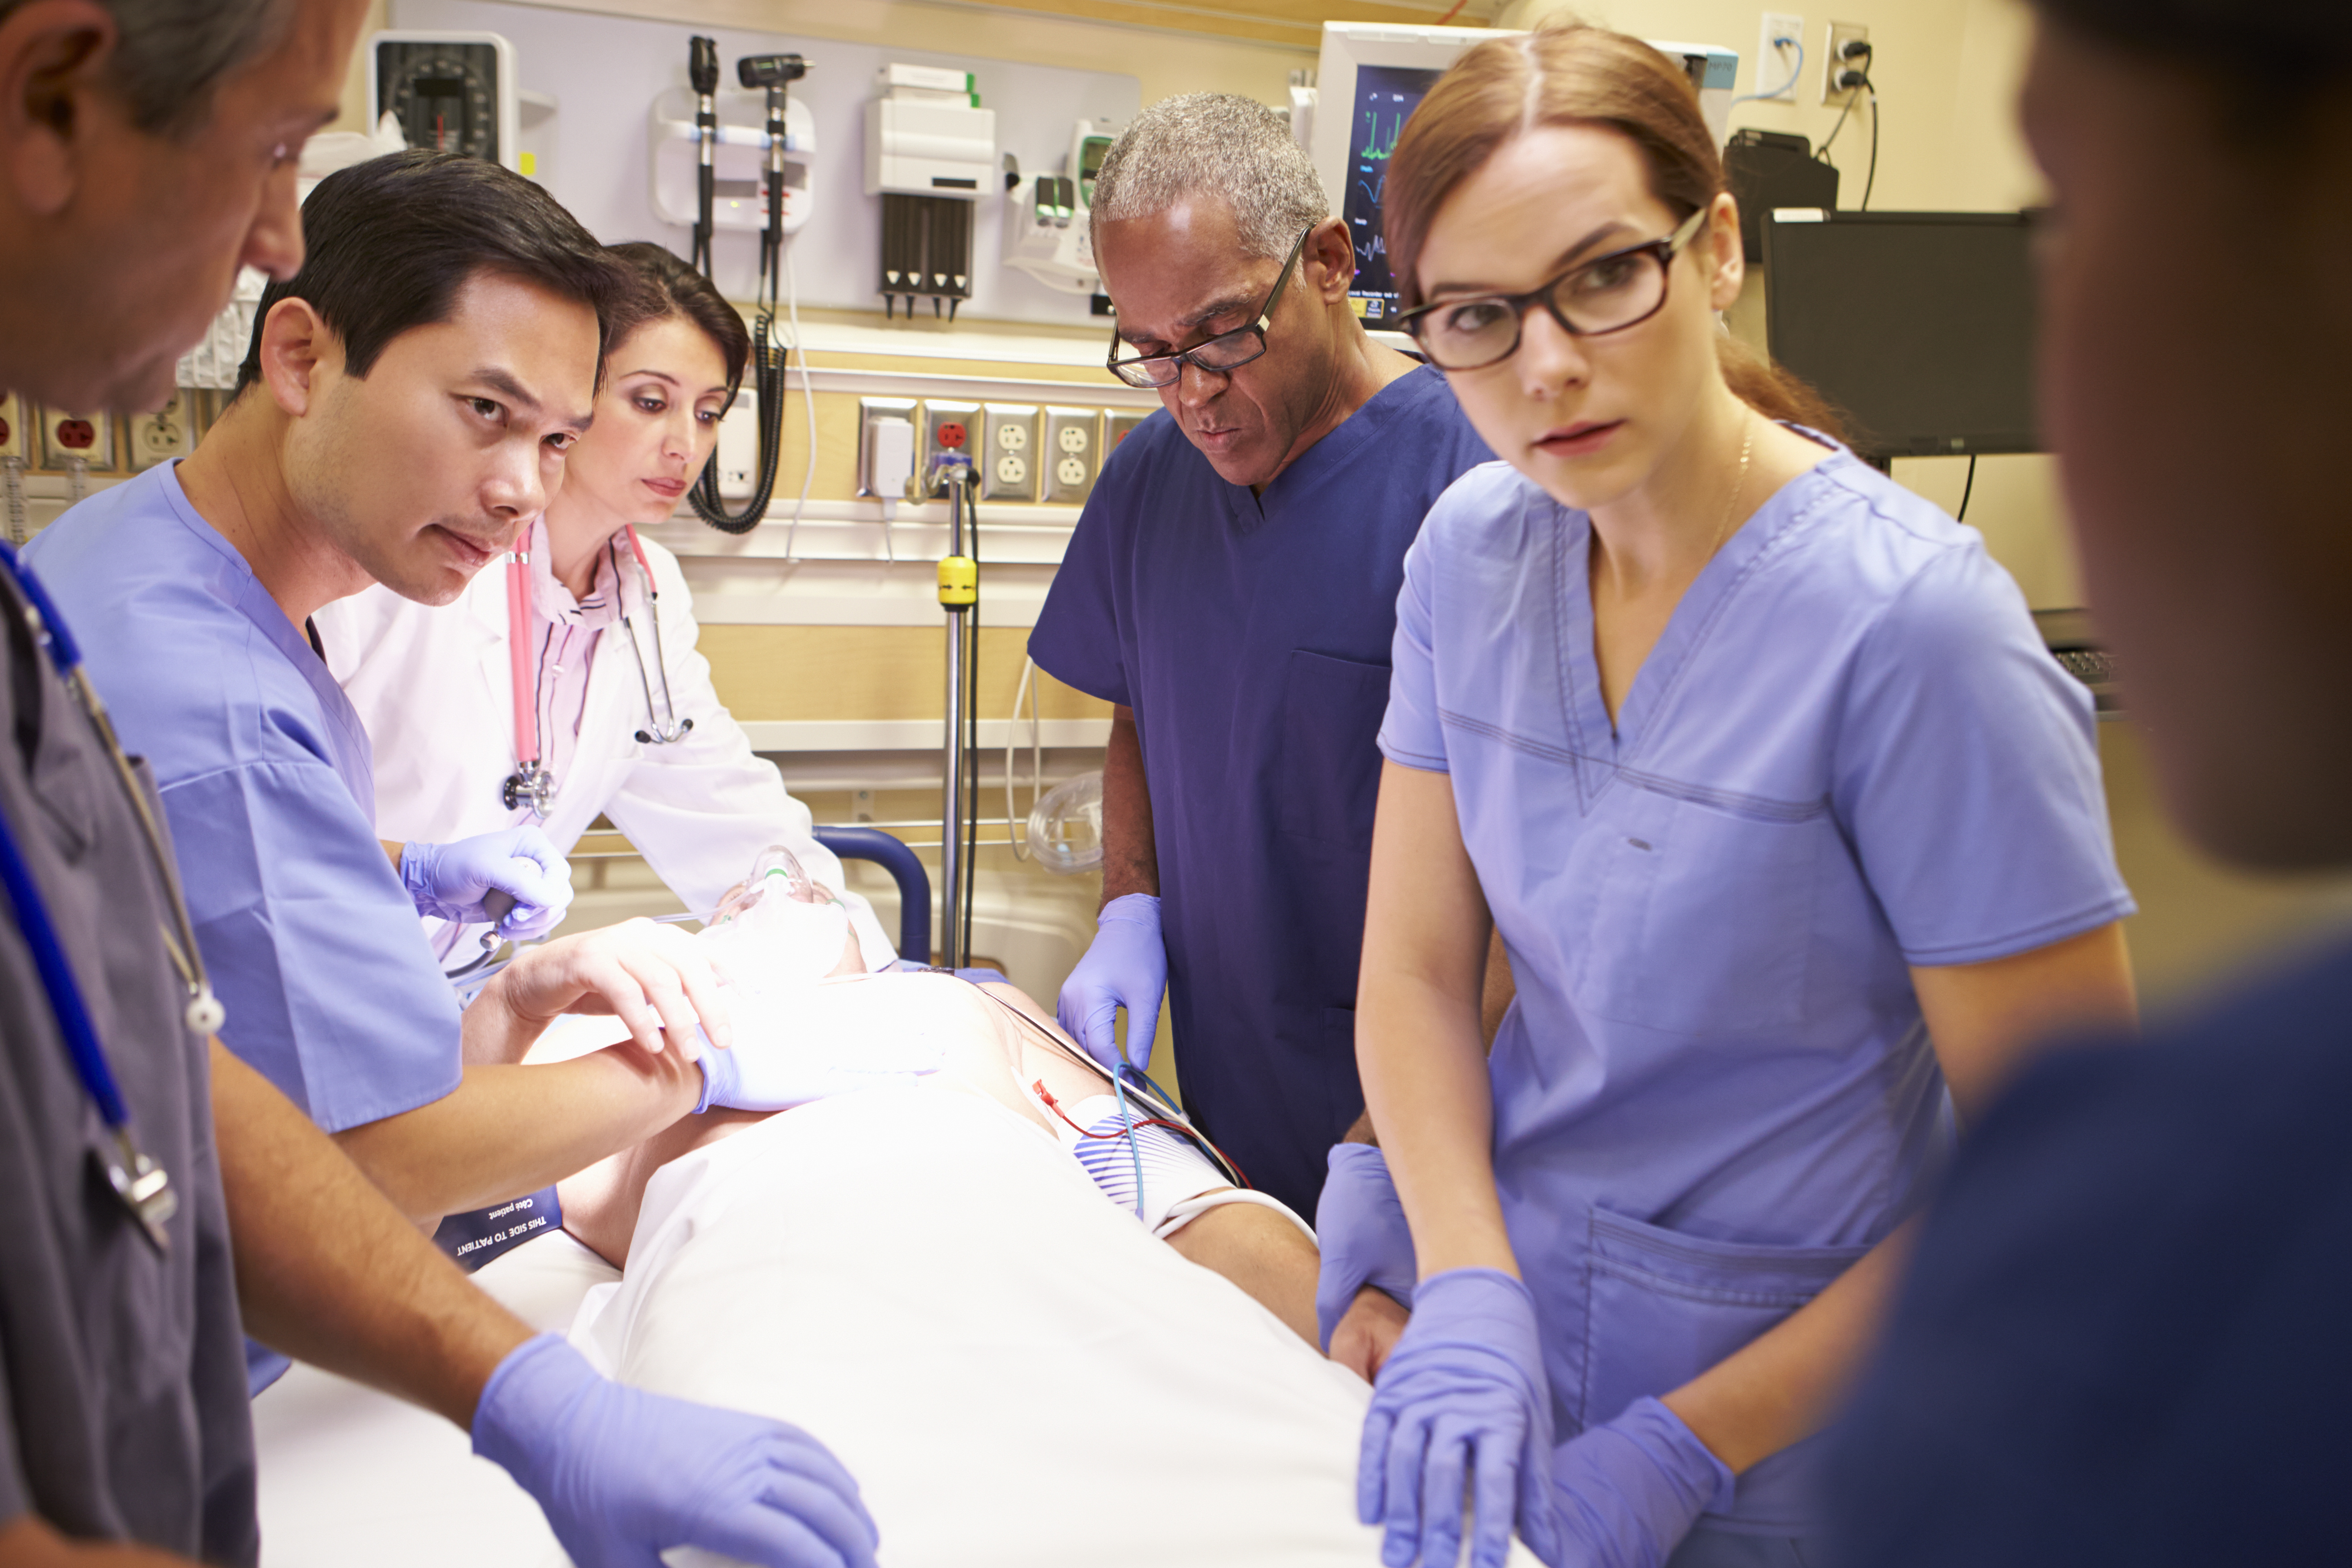 Become an emergency medicine physician